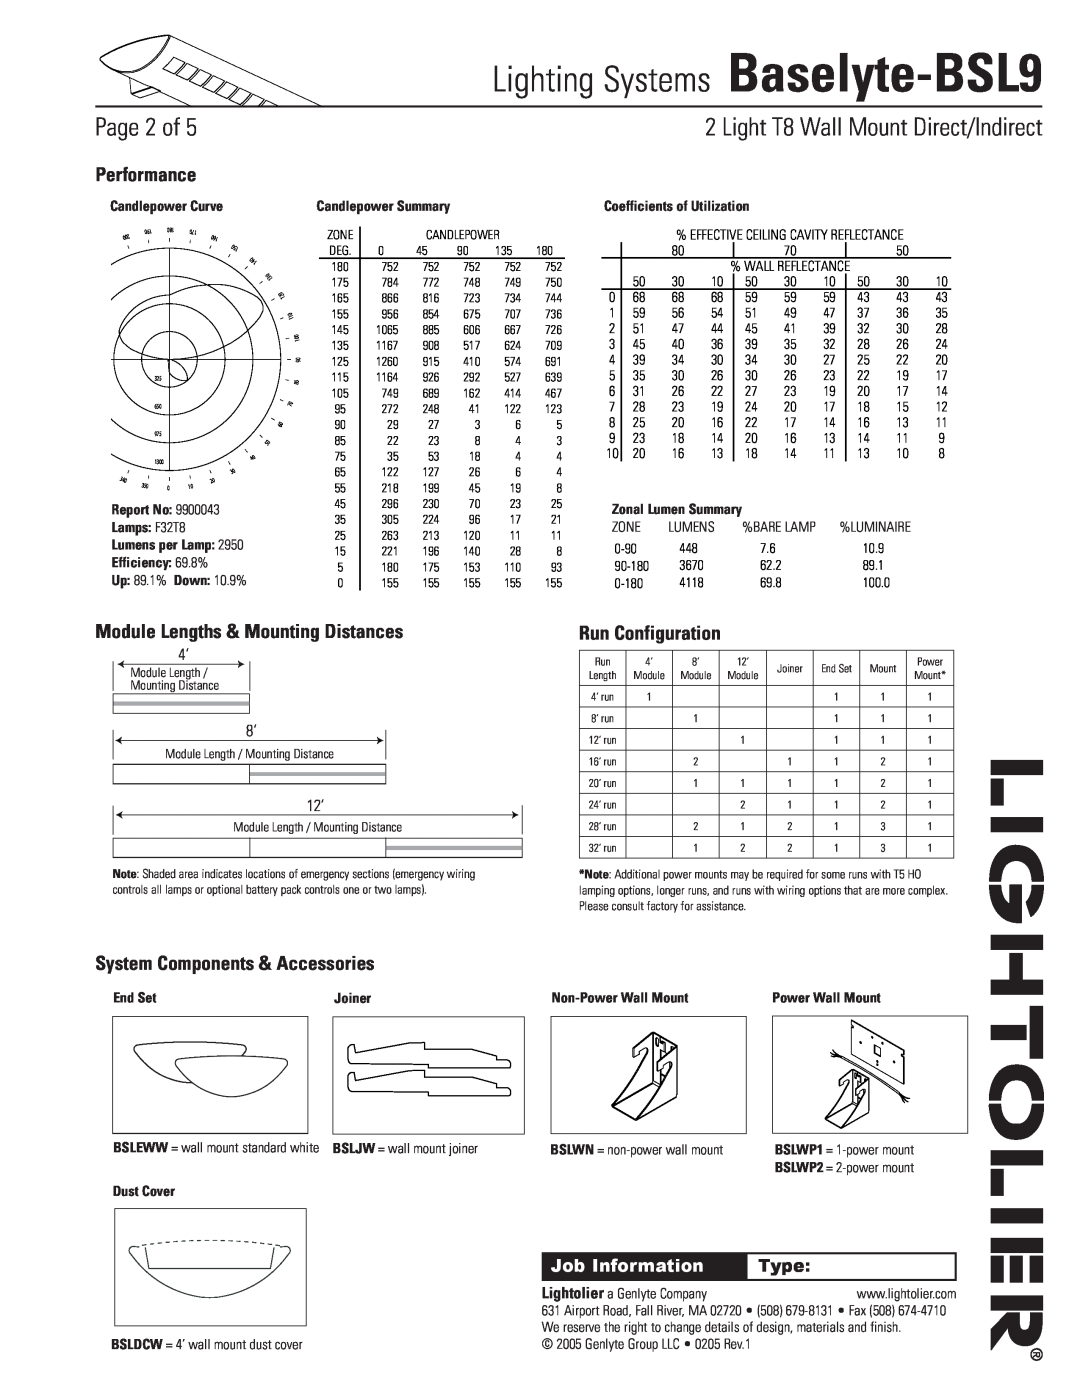 Lightolier Baselyte-BSL9 Page of, Performance, Module Lengths & Mounting Distances, Run Configuration, Type, End Set 